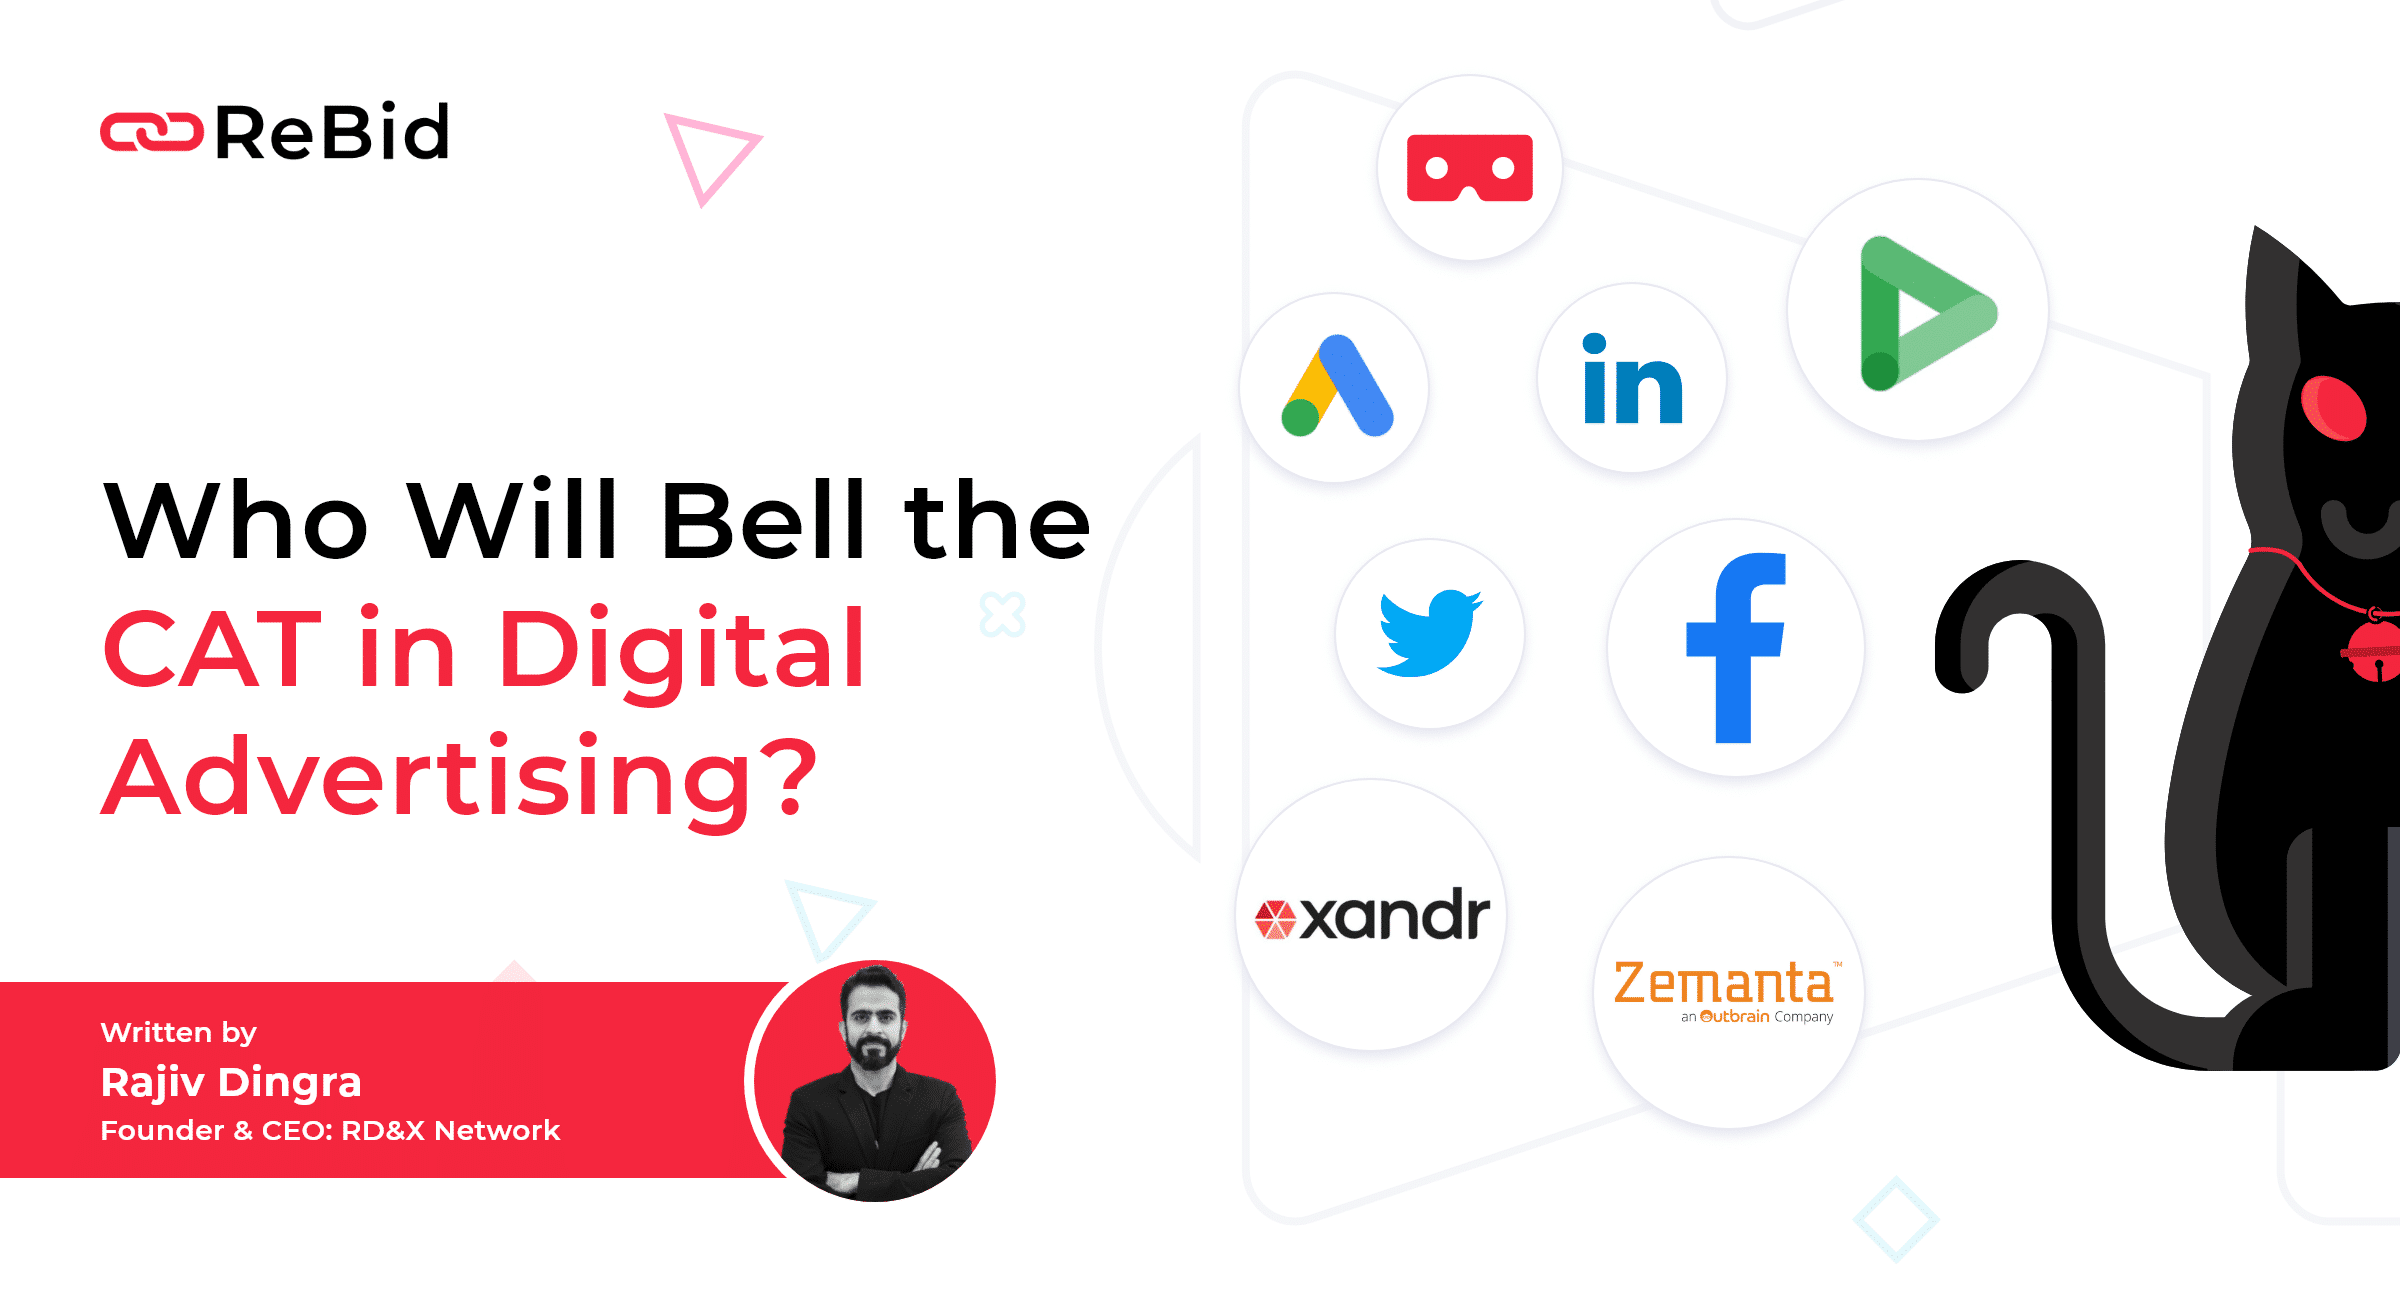 Who Will Bell the CAT in Digital Advertising?